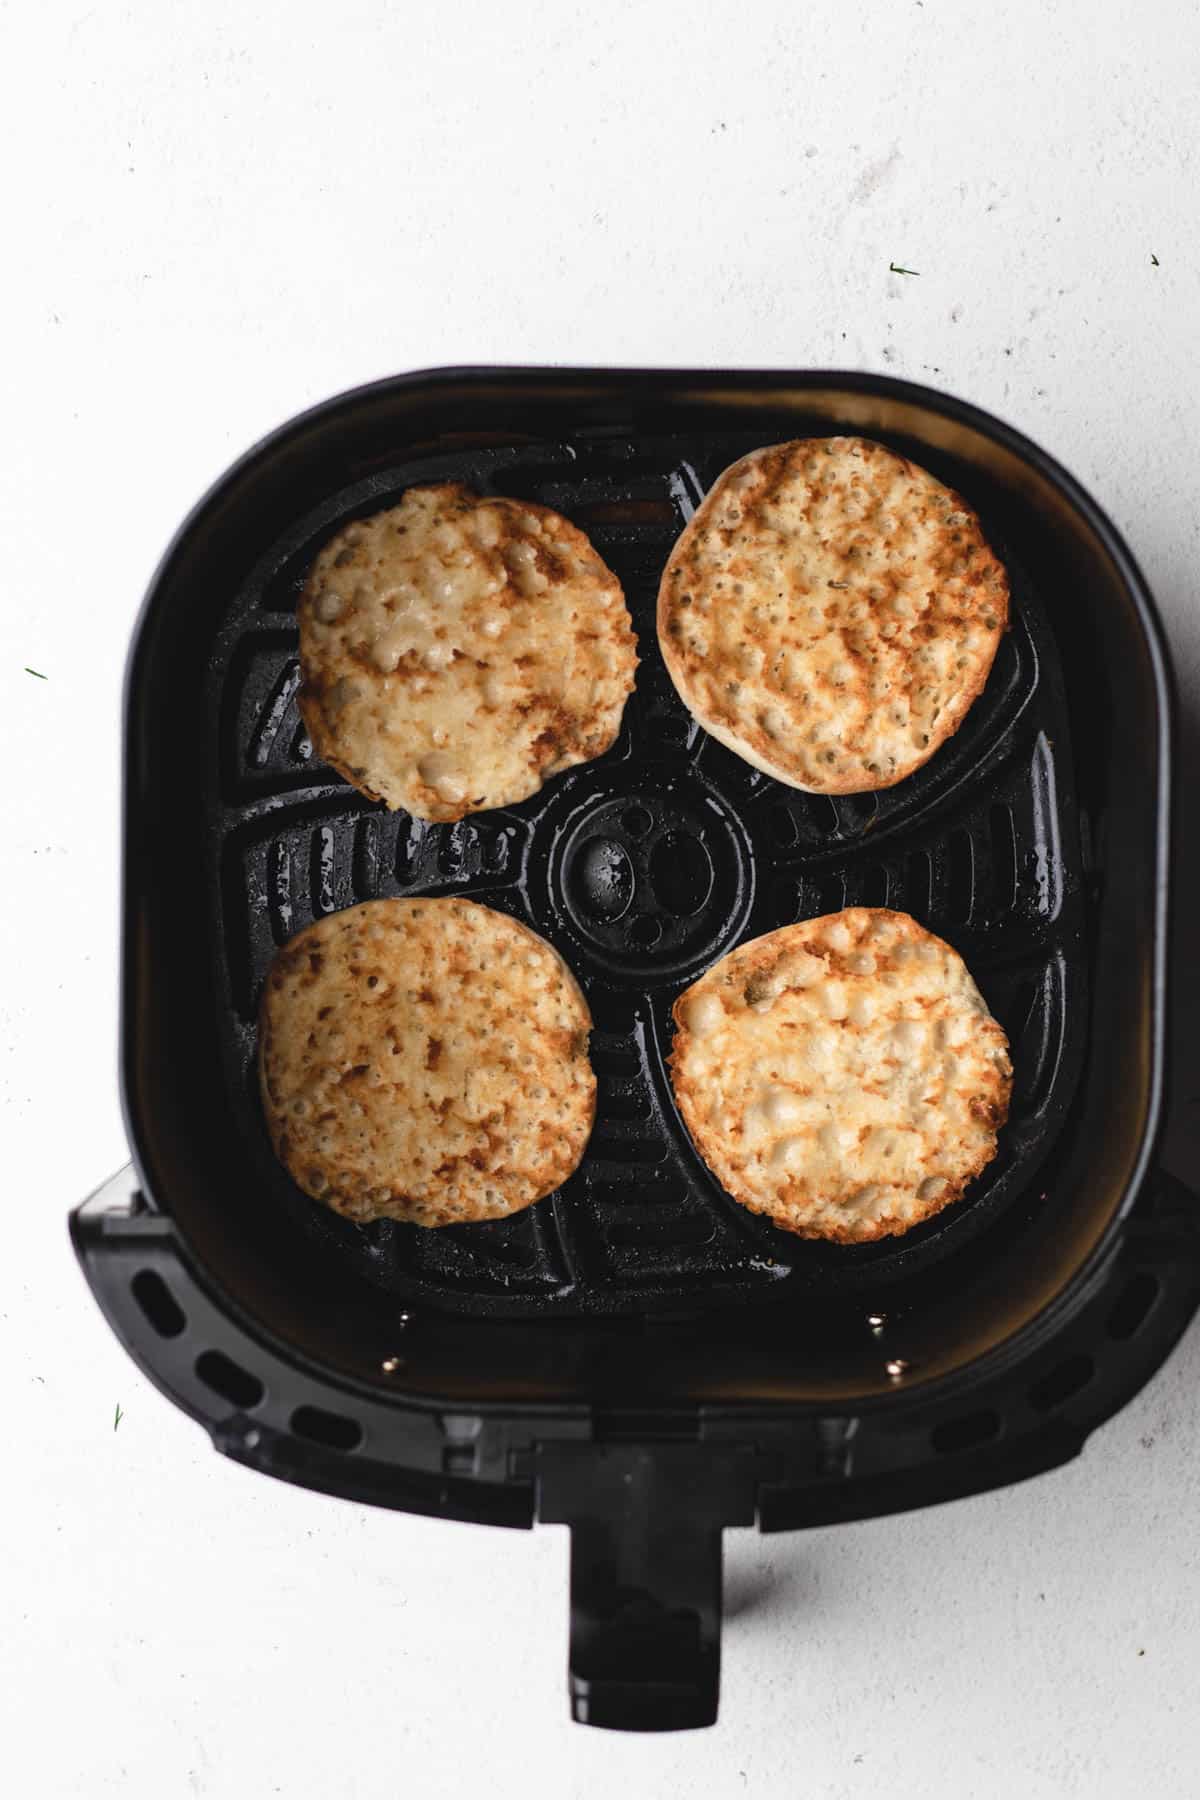 Toasting English muffins in an air fryer basket.